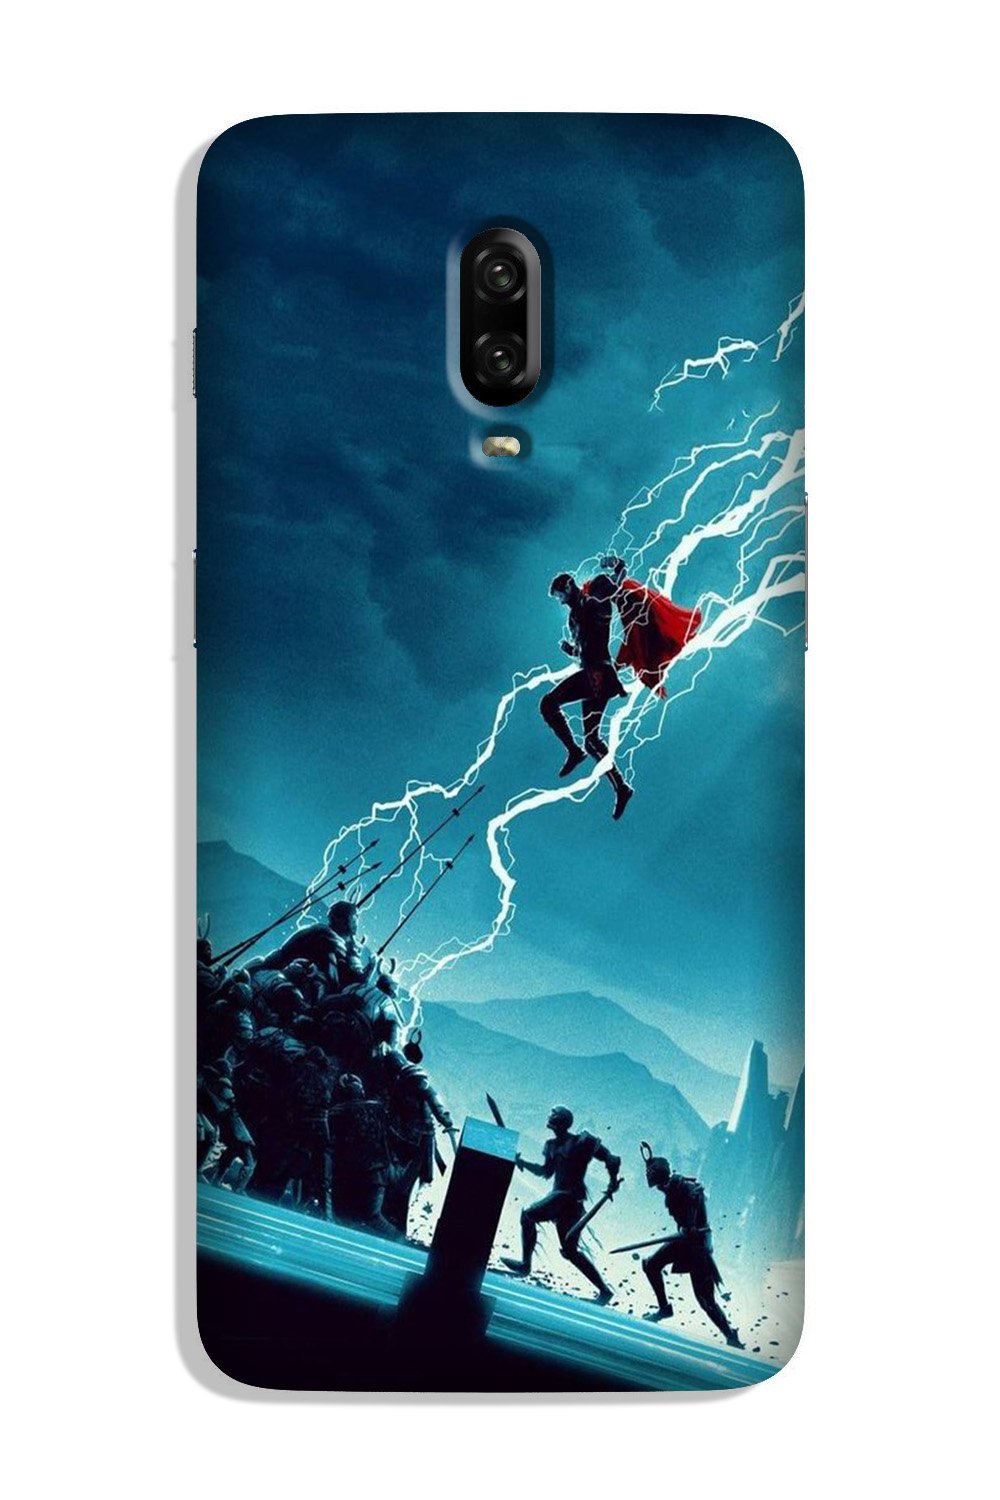 Thor Avengers Case for OnePlus 6T (Design No. 243)